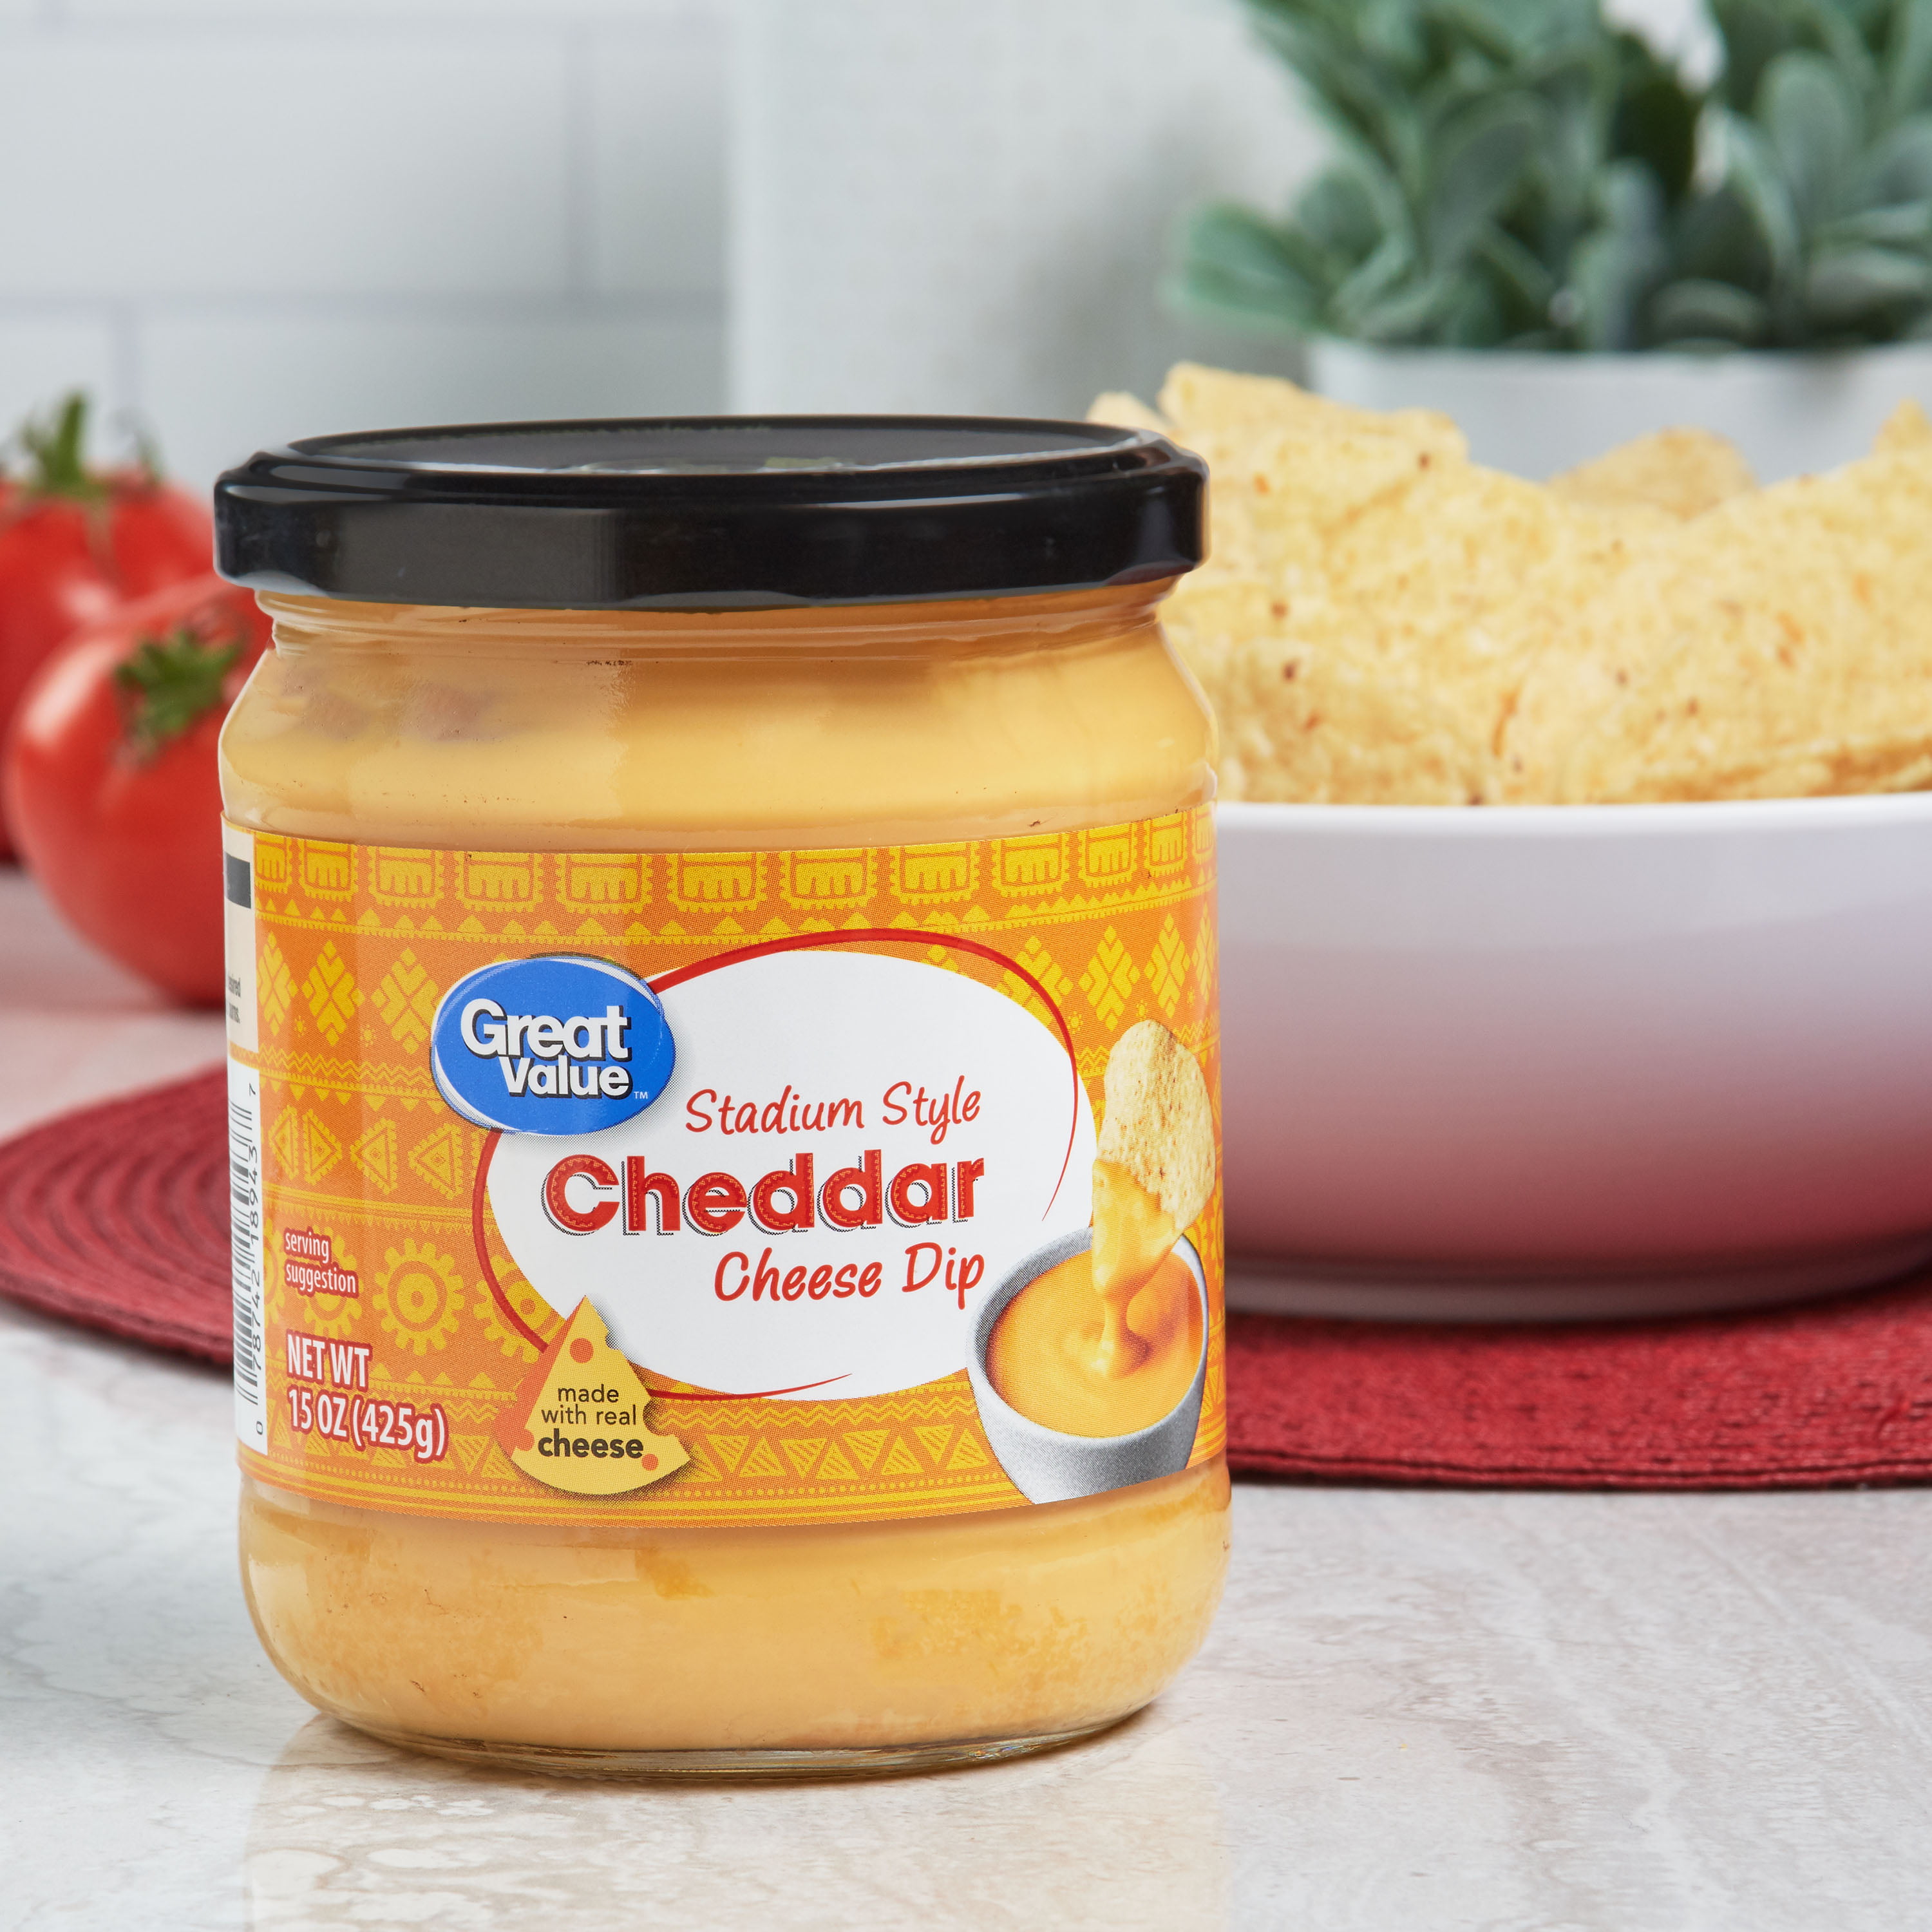 (4 Pack) Great Value Stadium Style Cheddar Cheese Dip, 15 oz - Walmart.com - Walmart.com How To Pack A Can Of Dip